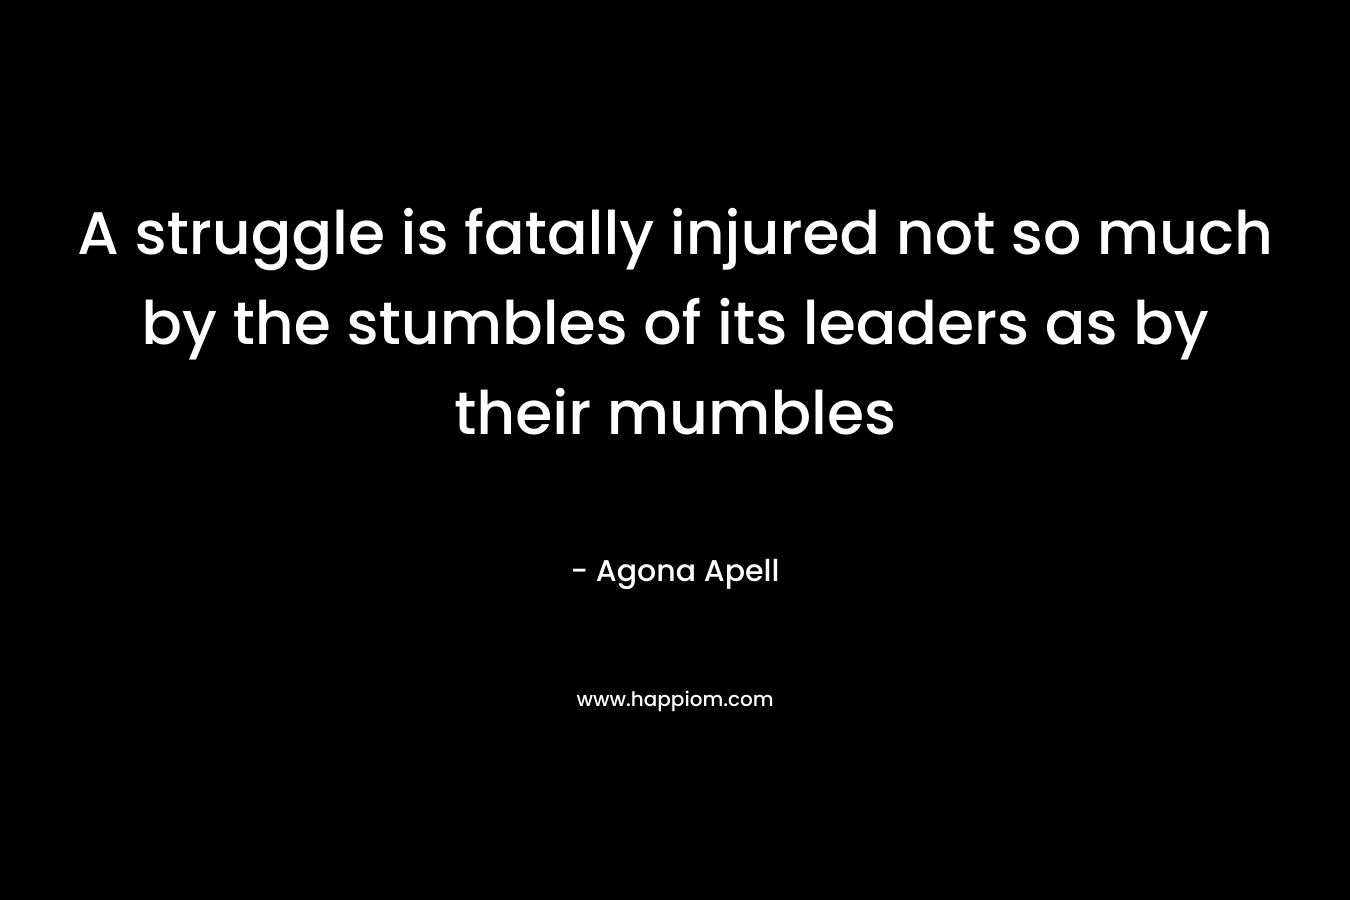 A struggle is fatally injured not so much by the stumbles of its leaders as by their mumbles – Agona Apell